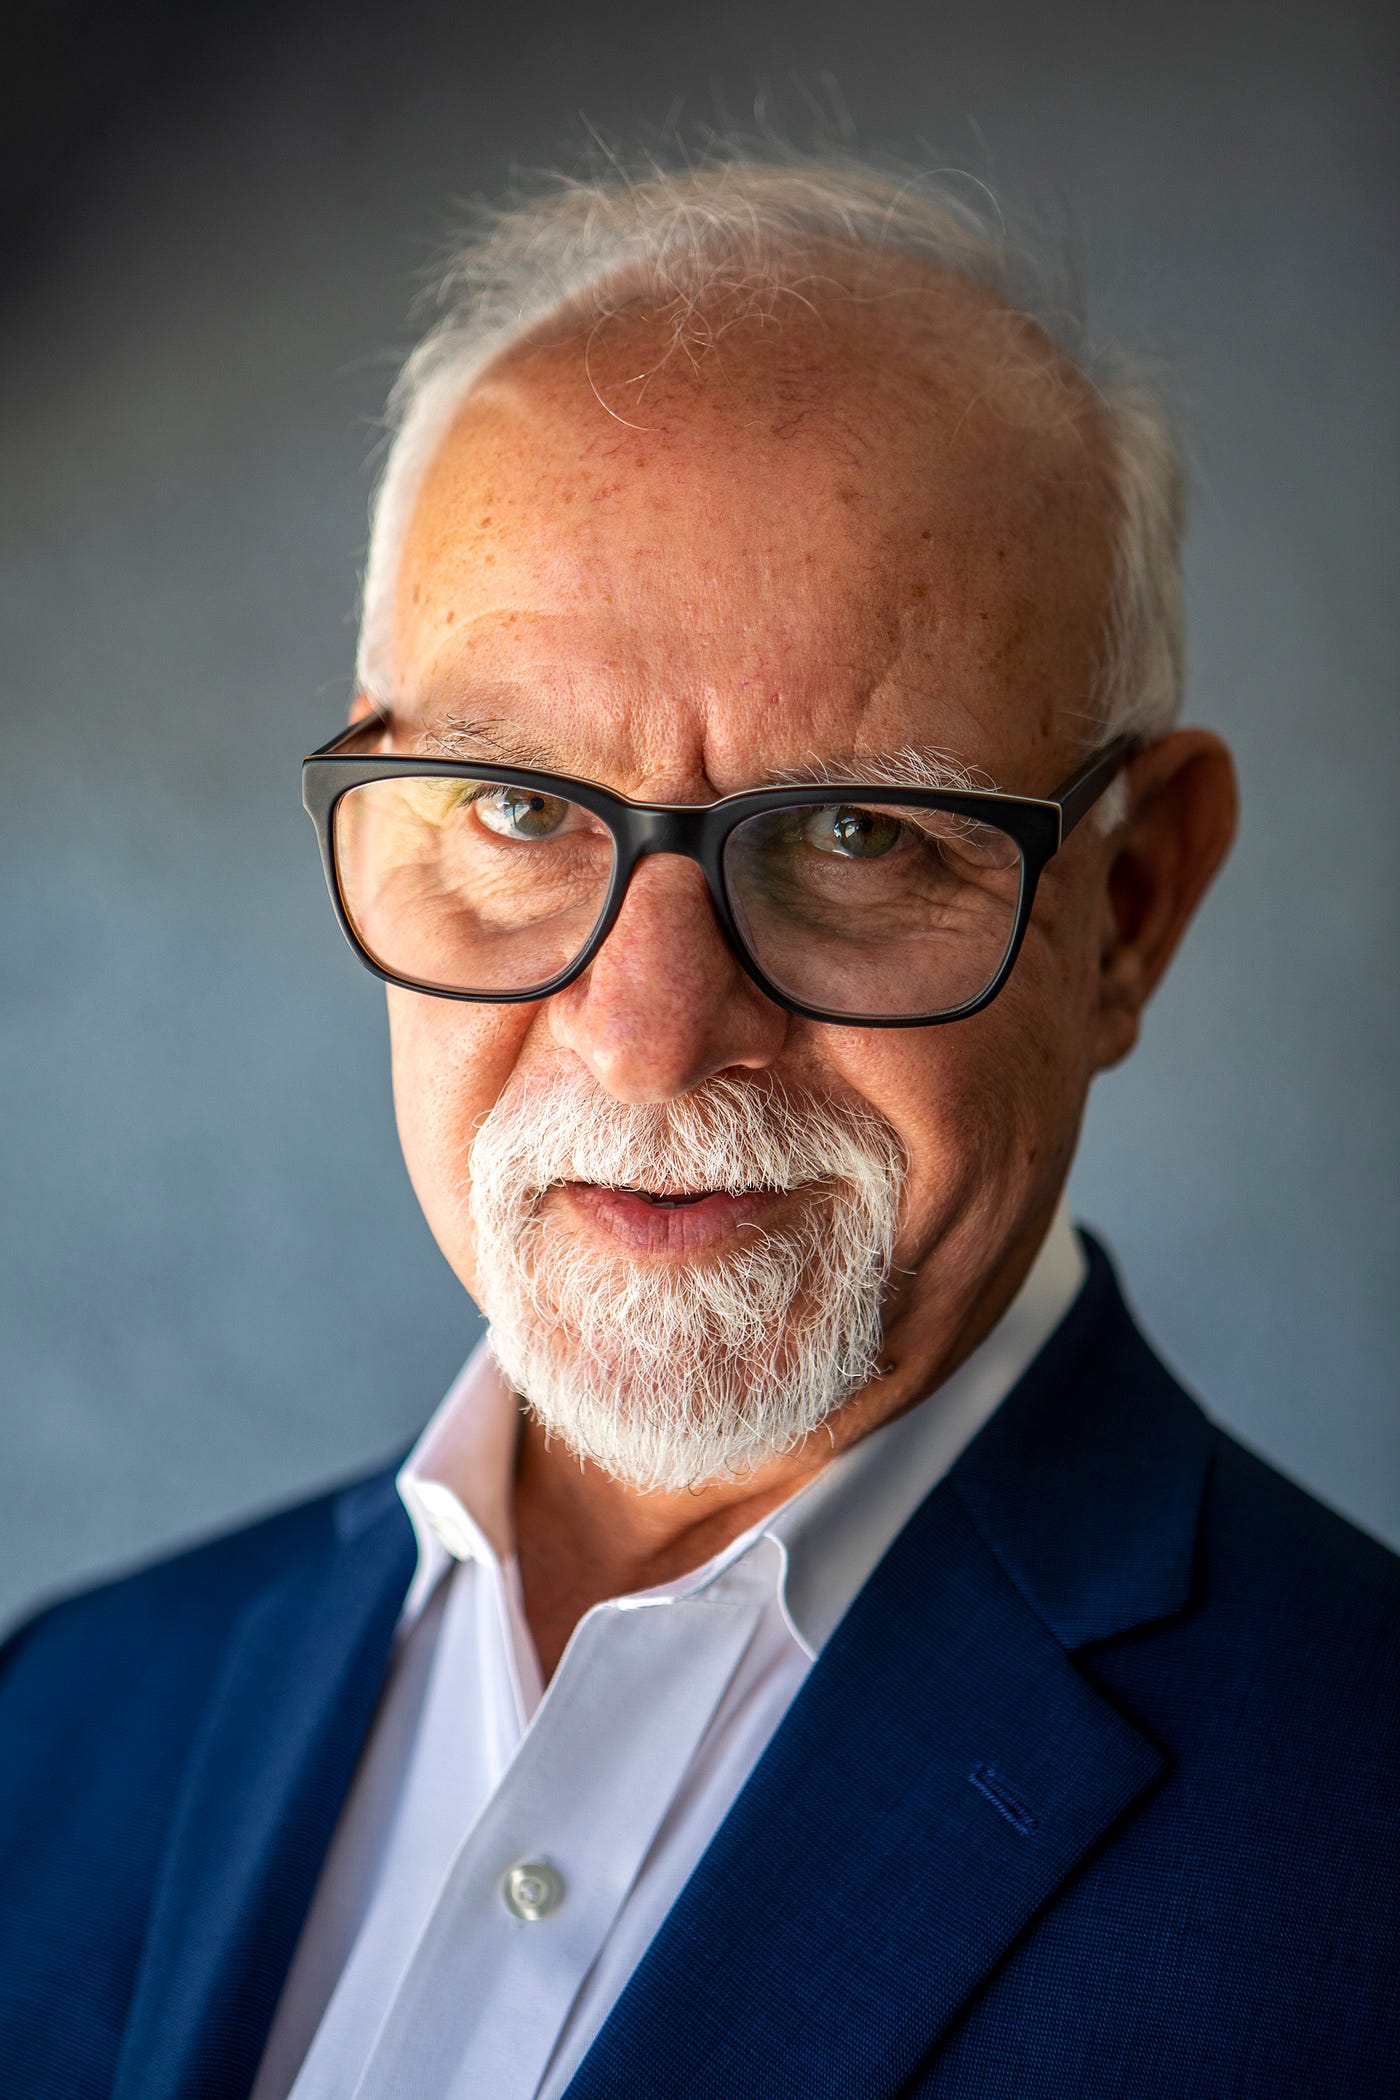 Interim, Inc. - Steve Lopez, renowned Los Angeles Times Journalist and  Author of the Soloist, is coming to the Monterey Bay Jan. 24, 2019 for a  speaking engagement. A BIG thank you